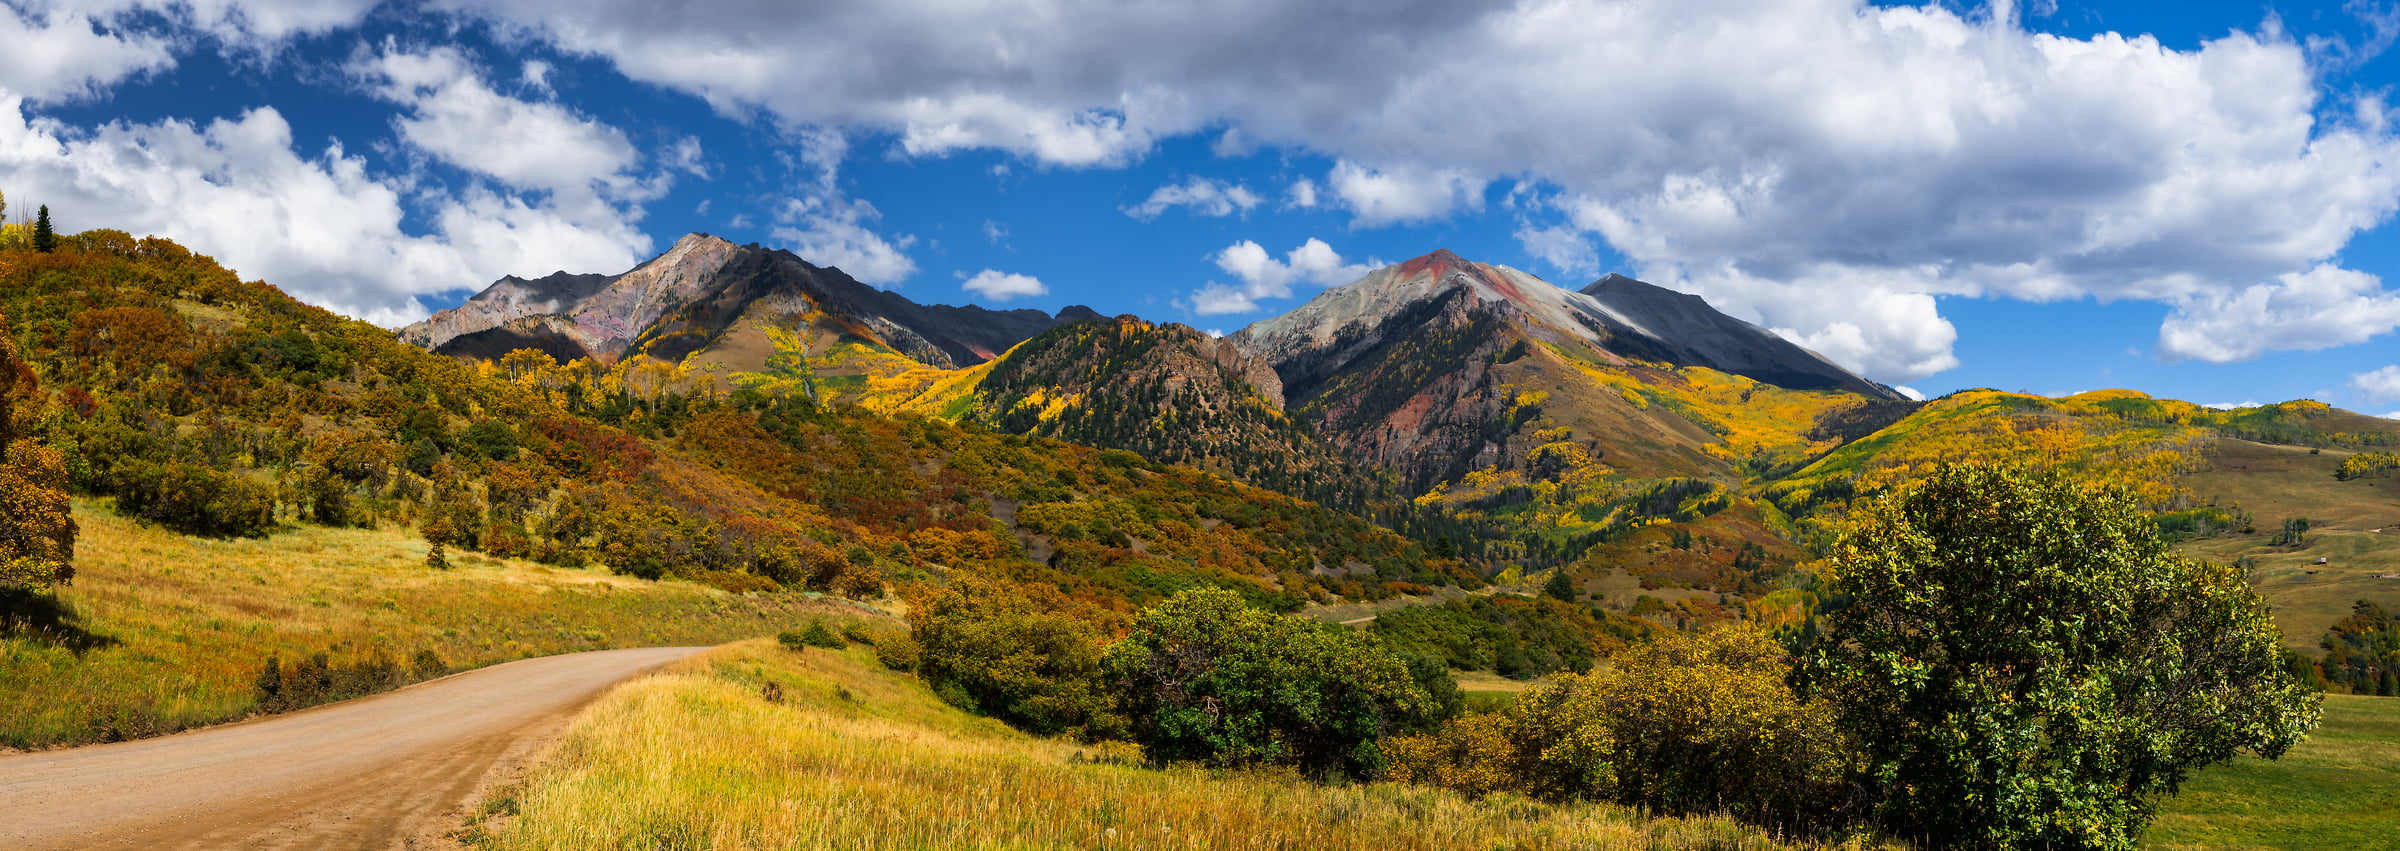 181 megapixels! A very high resolution, large-format VAST photo print of a Colorado landscape with mountains in autumn; photograph created by Phillip Noll in Telluride, Colorado